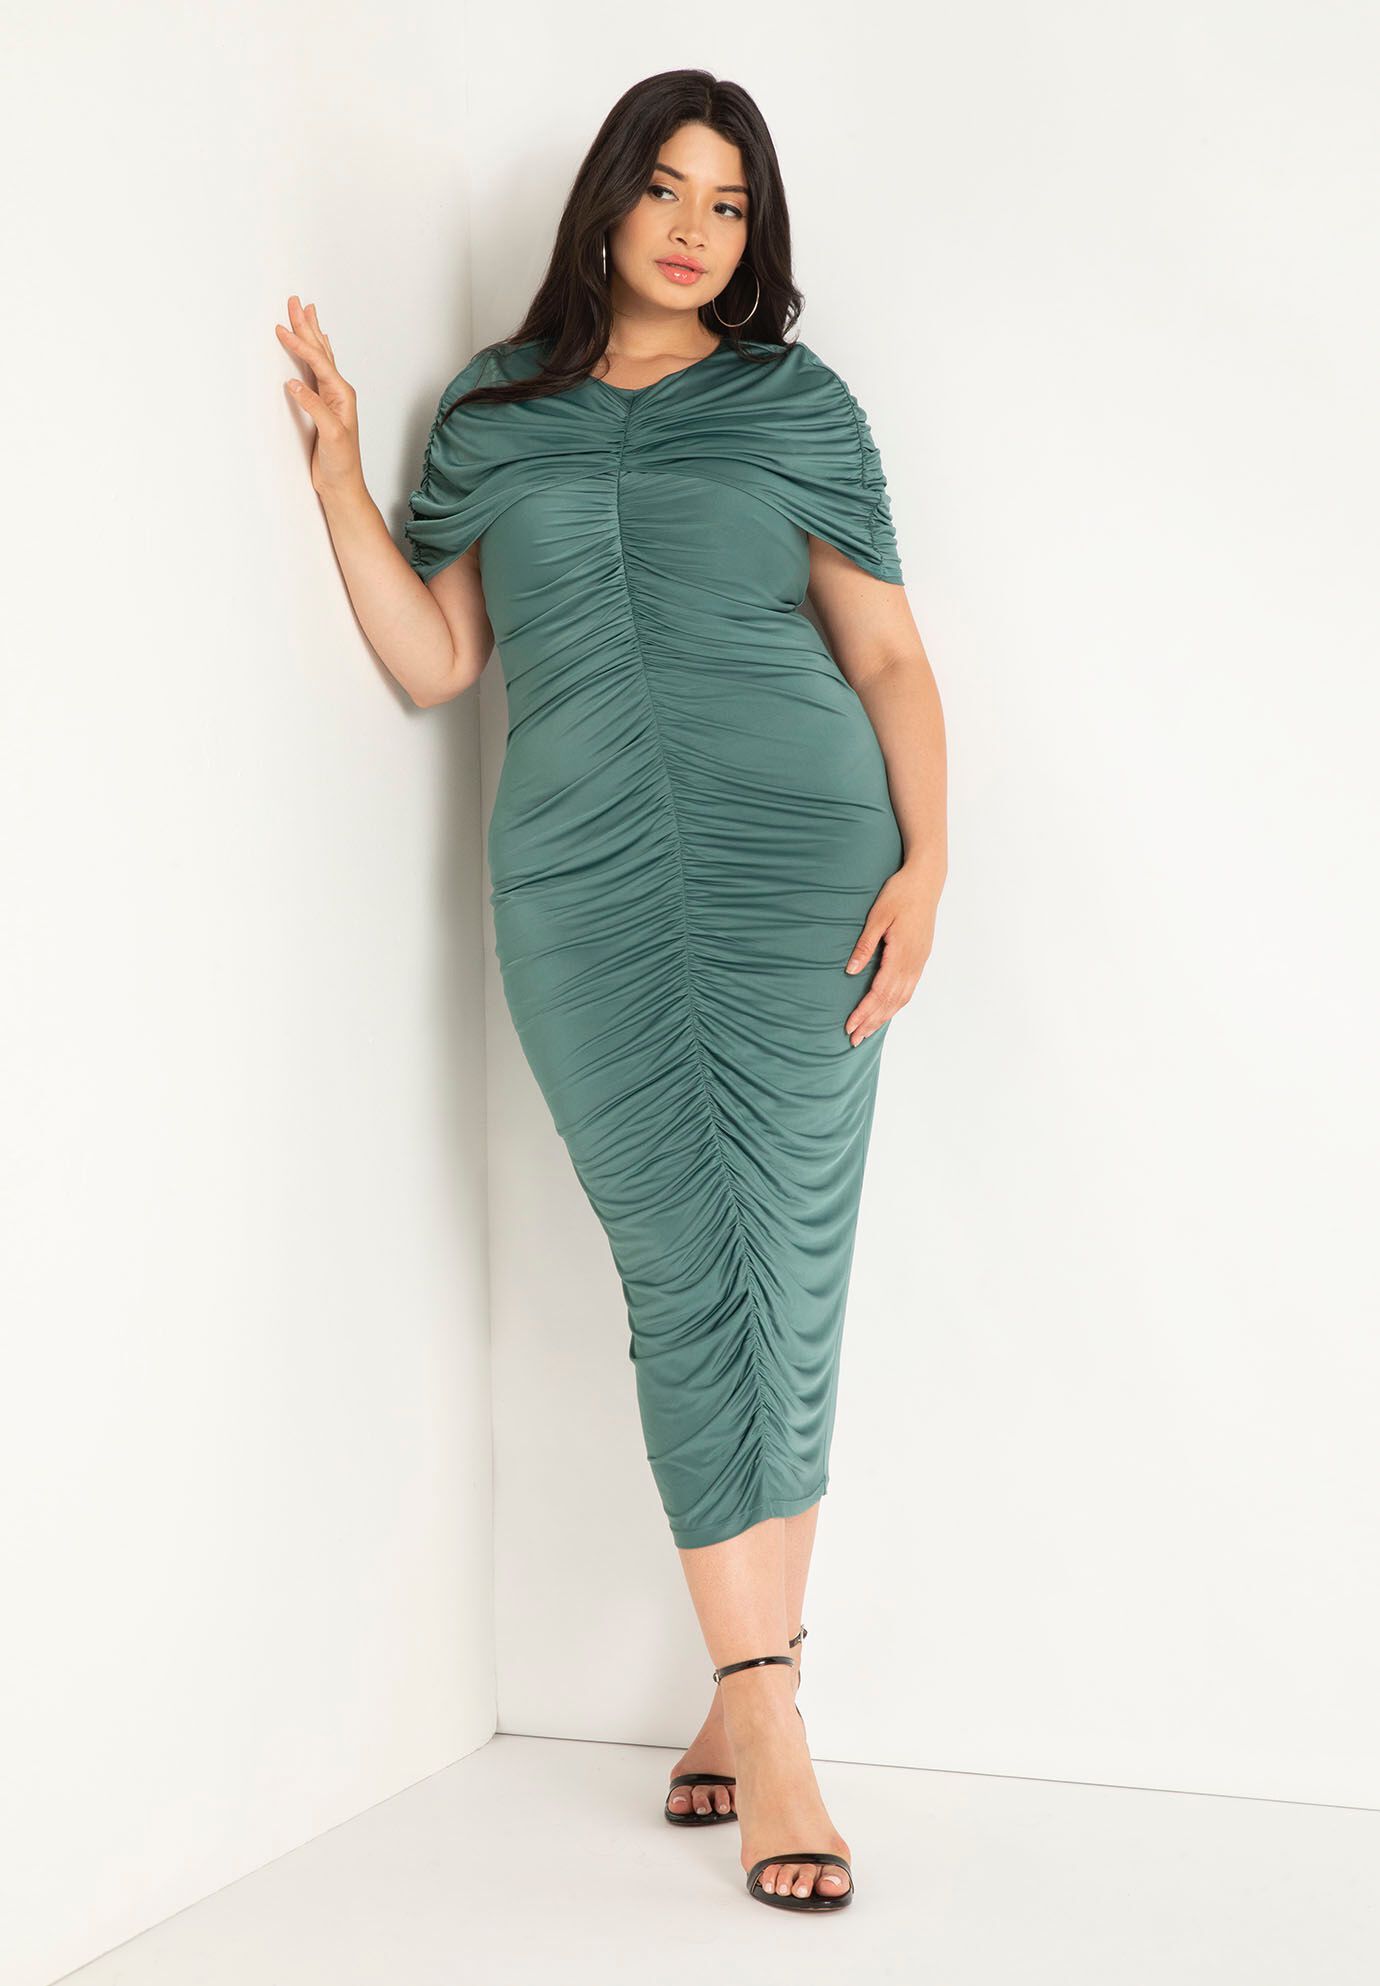 Ruched Shirred Bodycon Dress by Eloquii